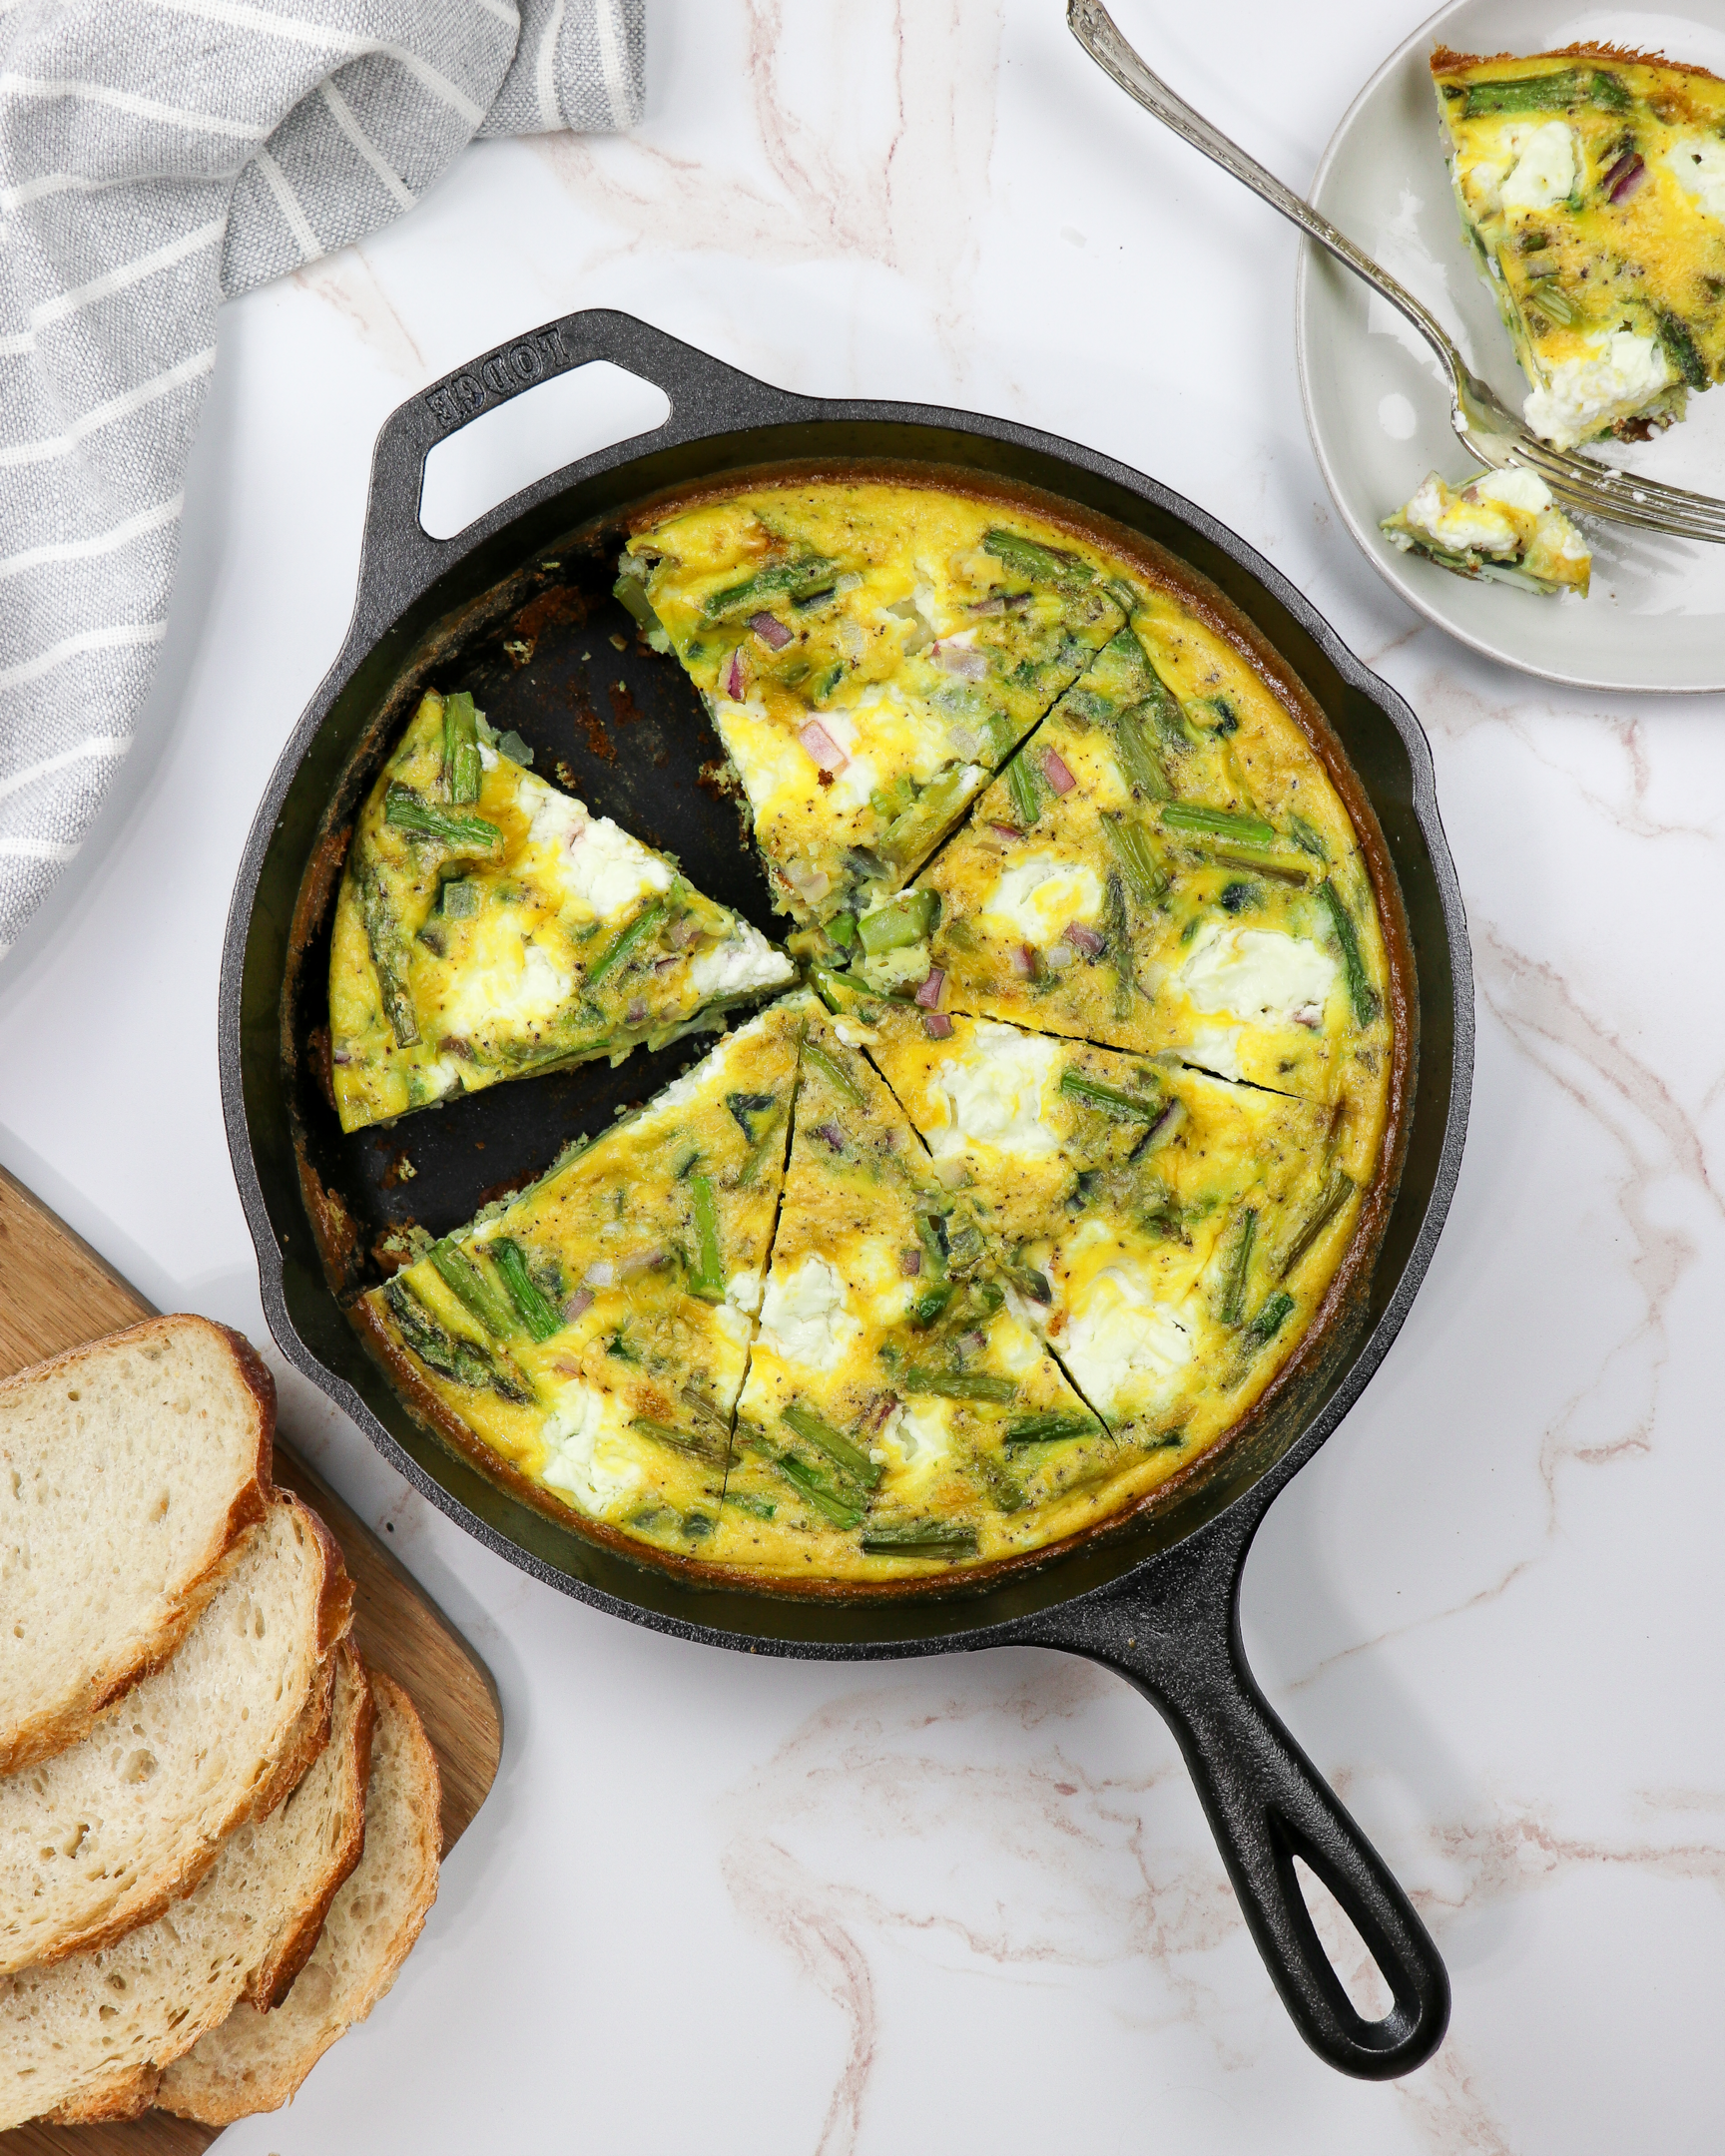 A veggie-packed frittata with wheat bread, mozzarella, and asparagus